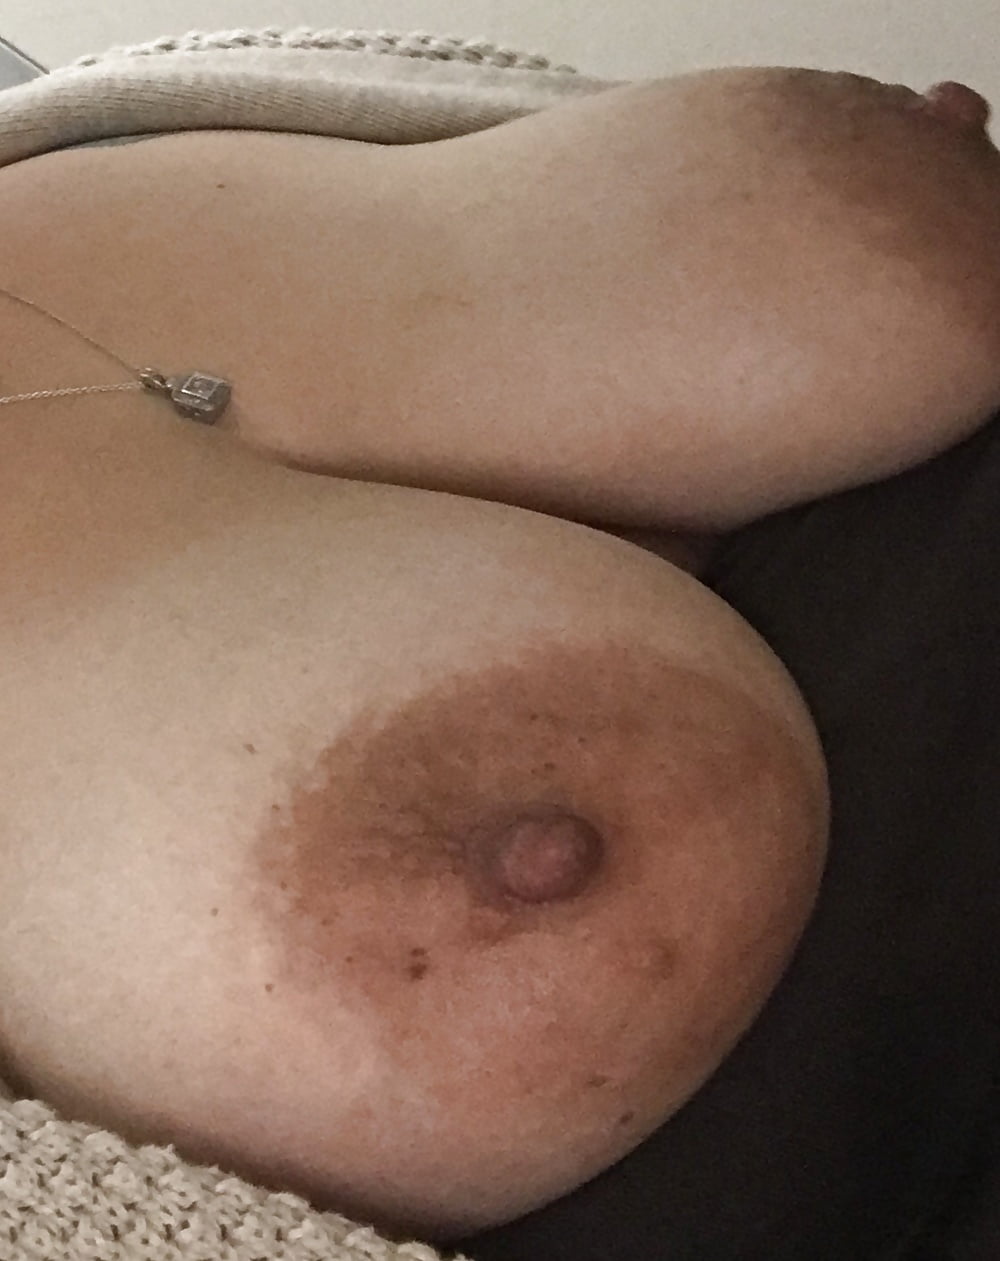 Wifes tits (1/1)